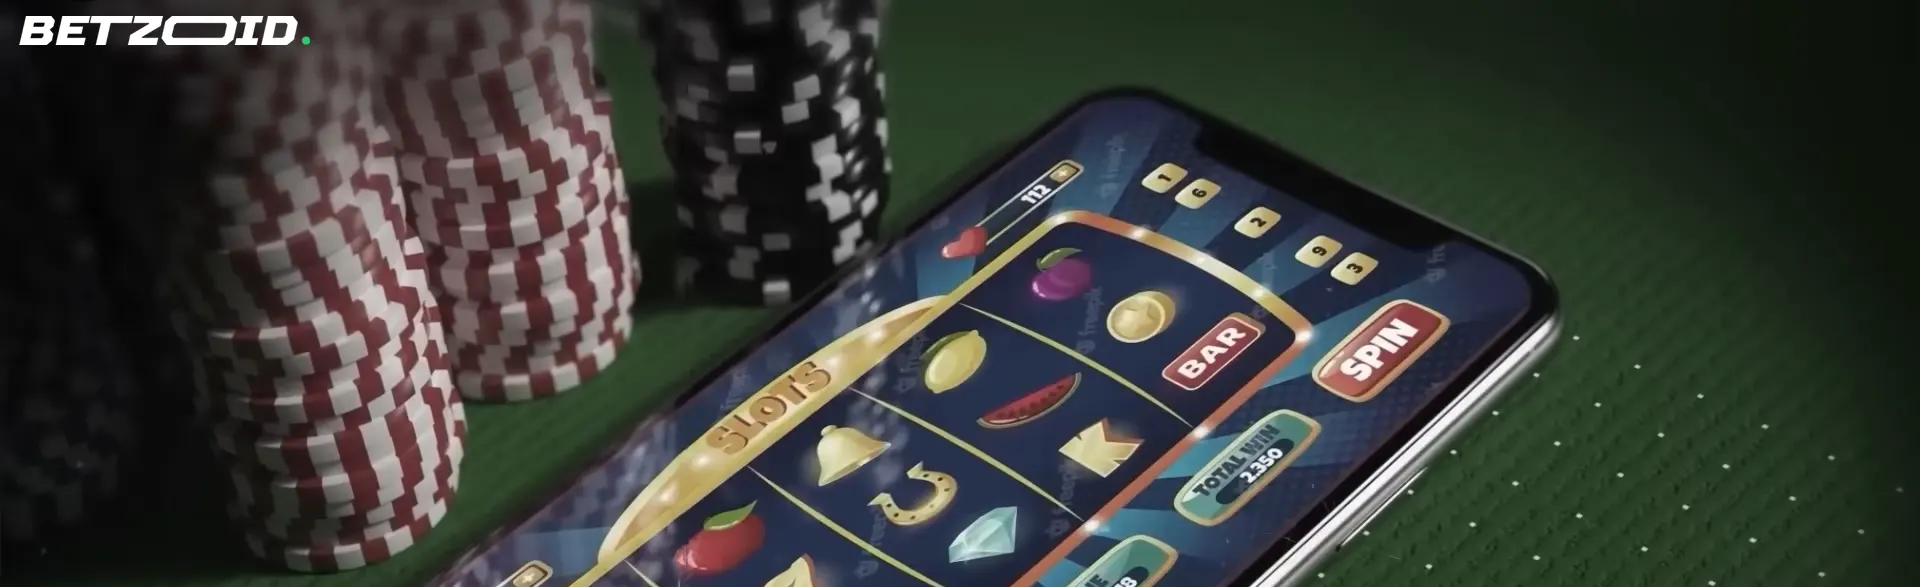 A smartphone displaying a slot game screen next to stacks of poker chips, representing mobile no deposit casinos in Canada.